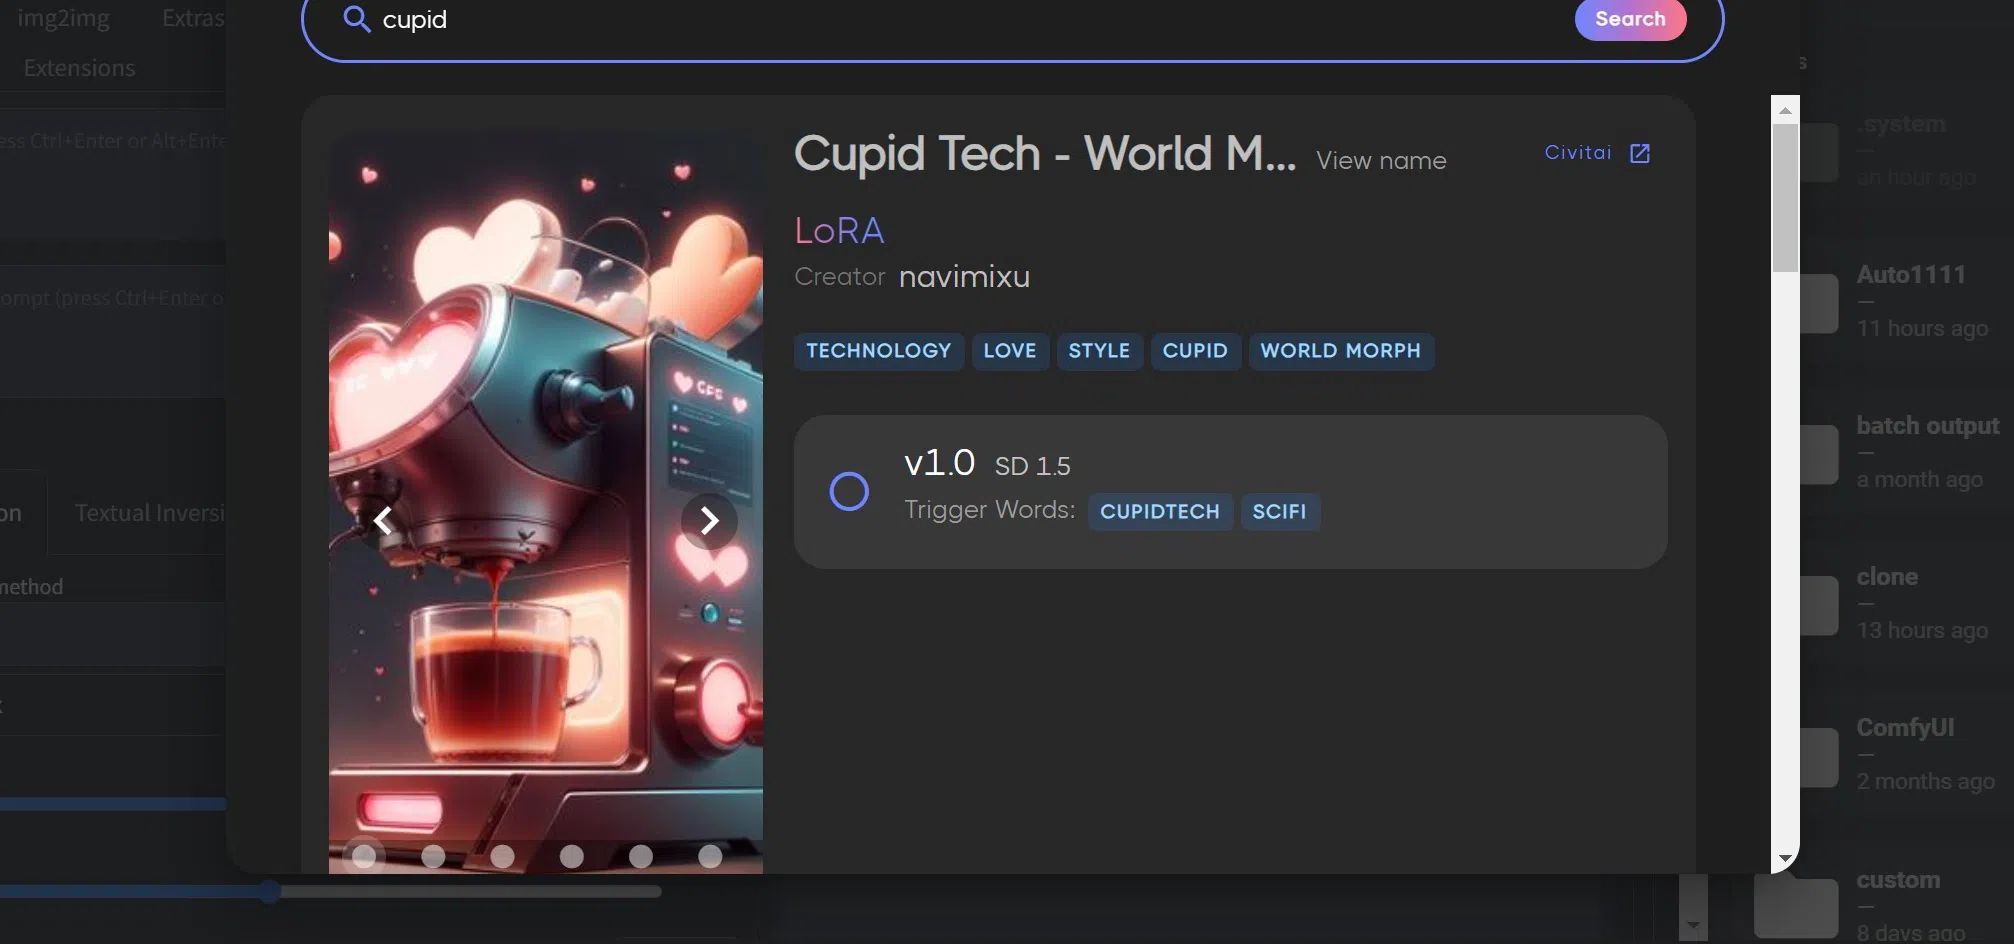 - Click on the "**Search**" field, and start typing
- then hit "**Search"** again to begin the search.
- For example, after typing "**Cupid**", "**Cupid Tech - World Morph**" which is LoRA, will appear.
- Select the listed version **v1.0**.
- Then click "**Download**".